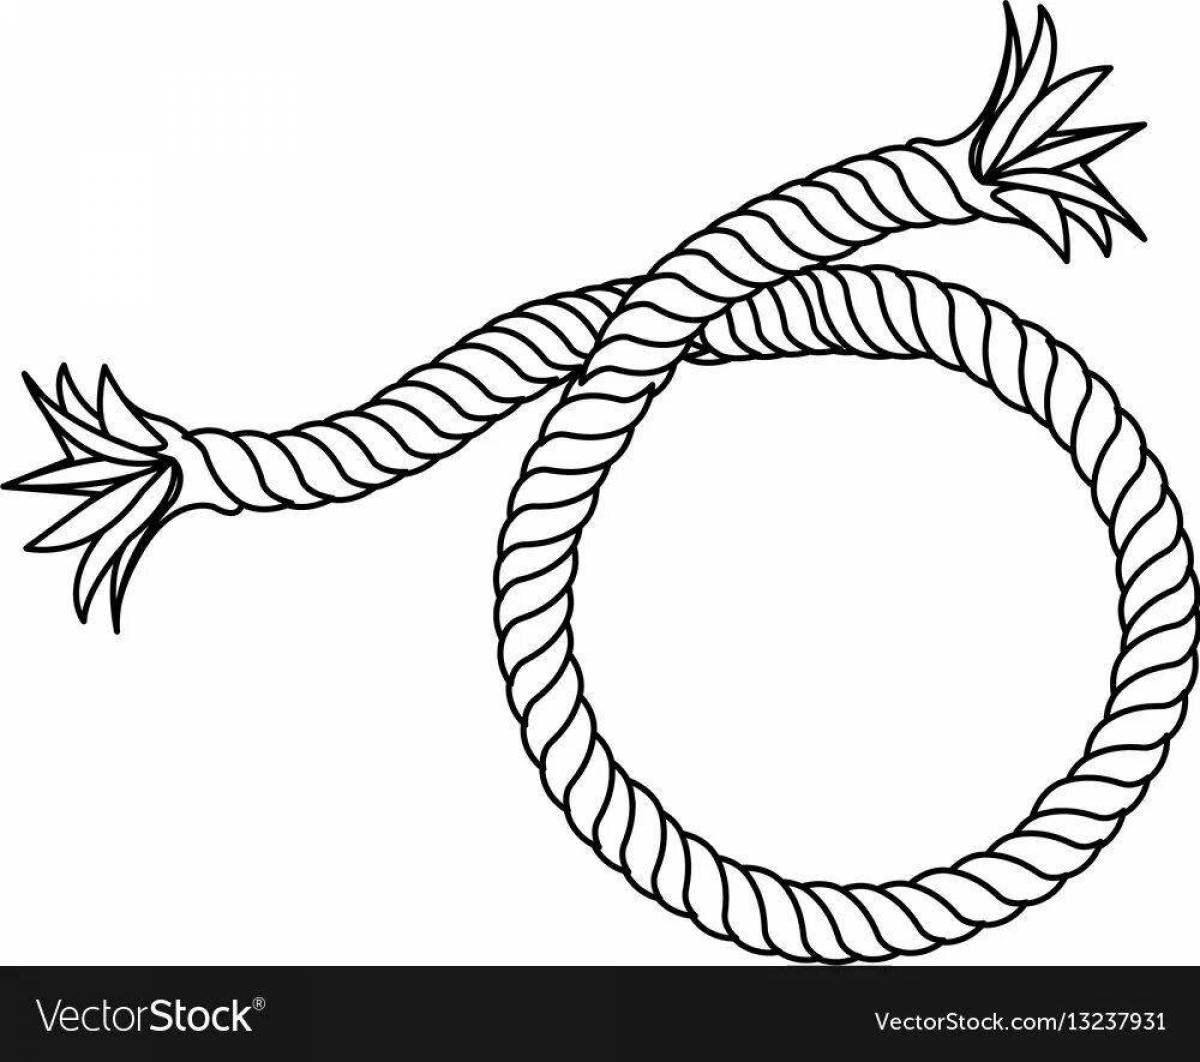 Playful rope coloring page